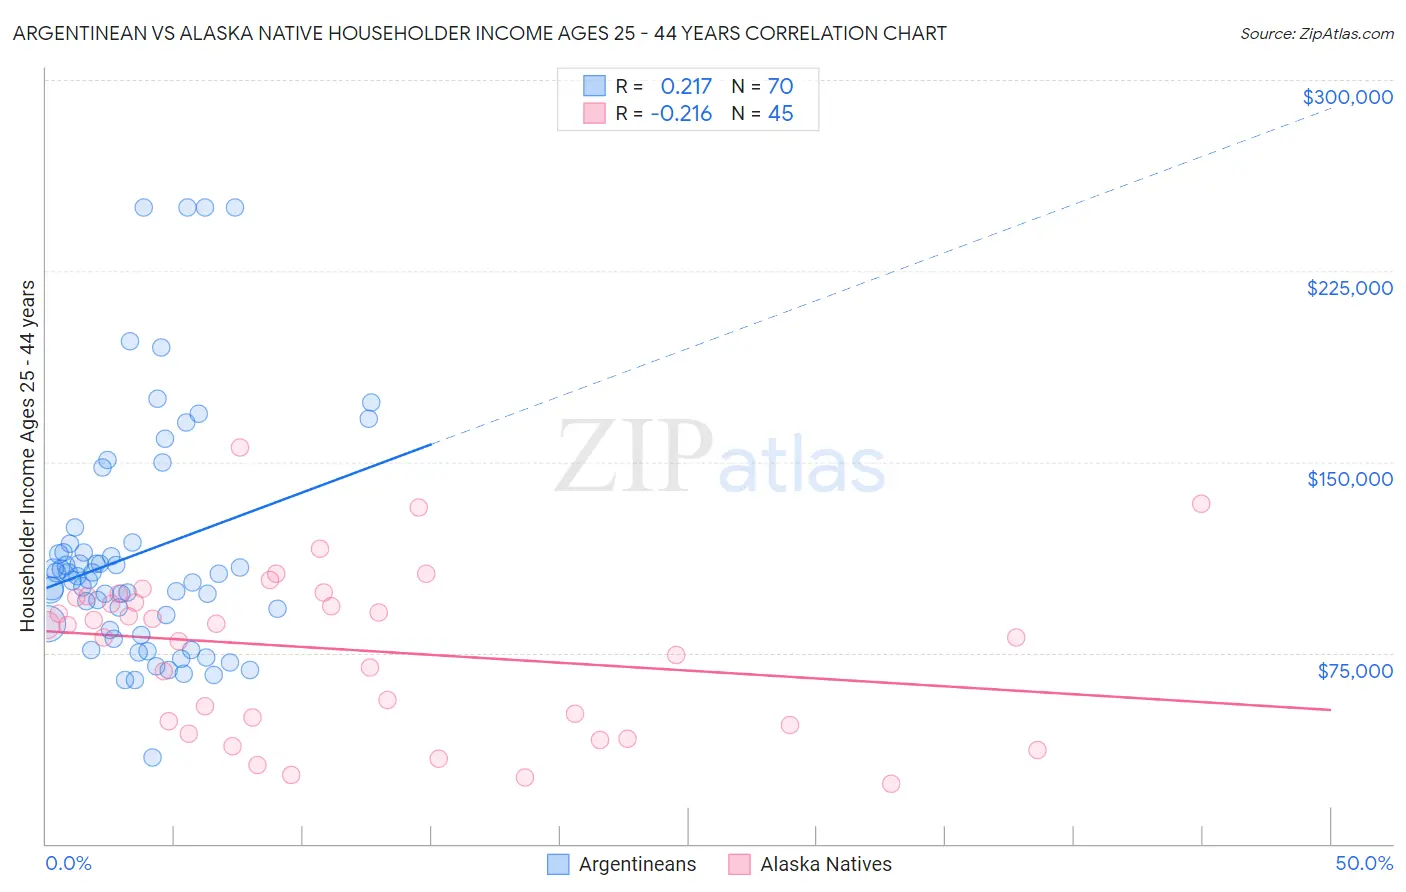 Argentinean vs Alaska Native Householder Income Ages 25 - 44 years